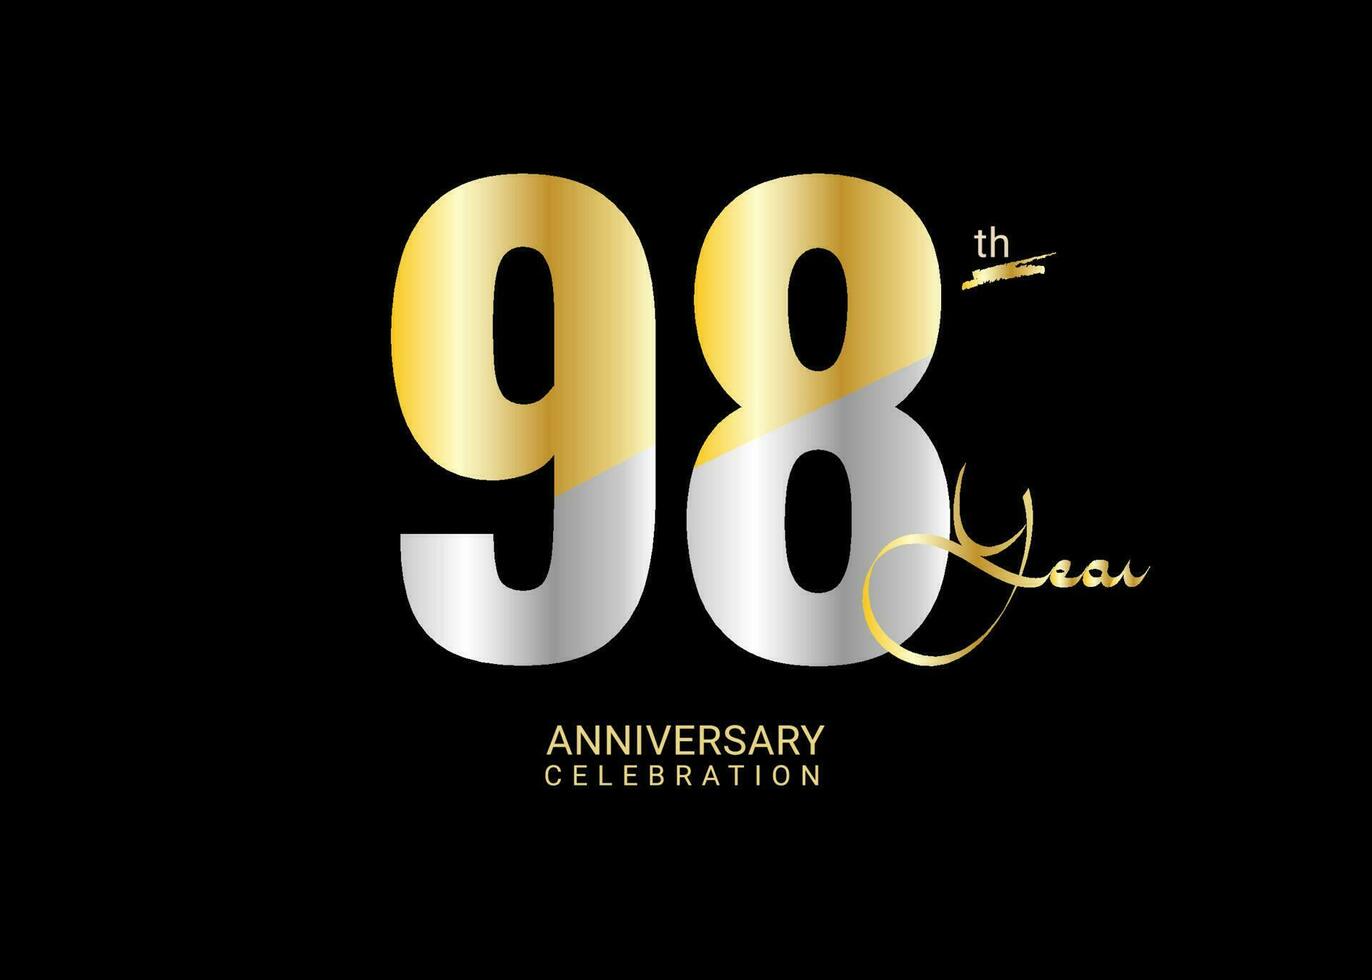 98 Years Anniversary Celebration gold and silver Vector Template, 98 number logo design, 98th Birthday Logo,  logotype Anniversary, Vector Anniversary For Celebration, poster, Invitation Card